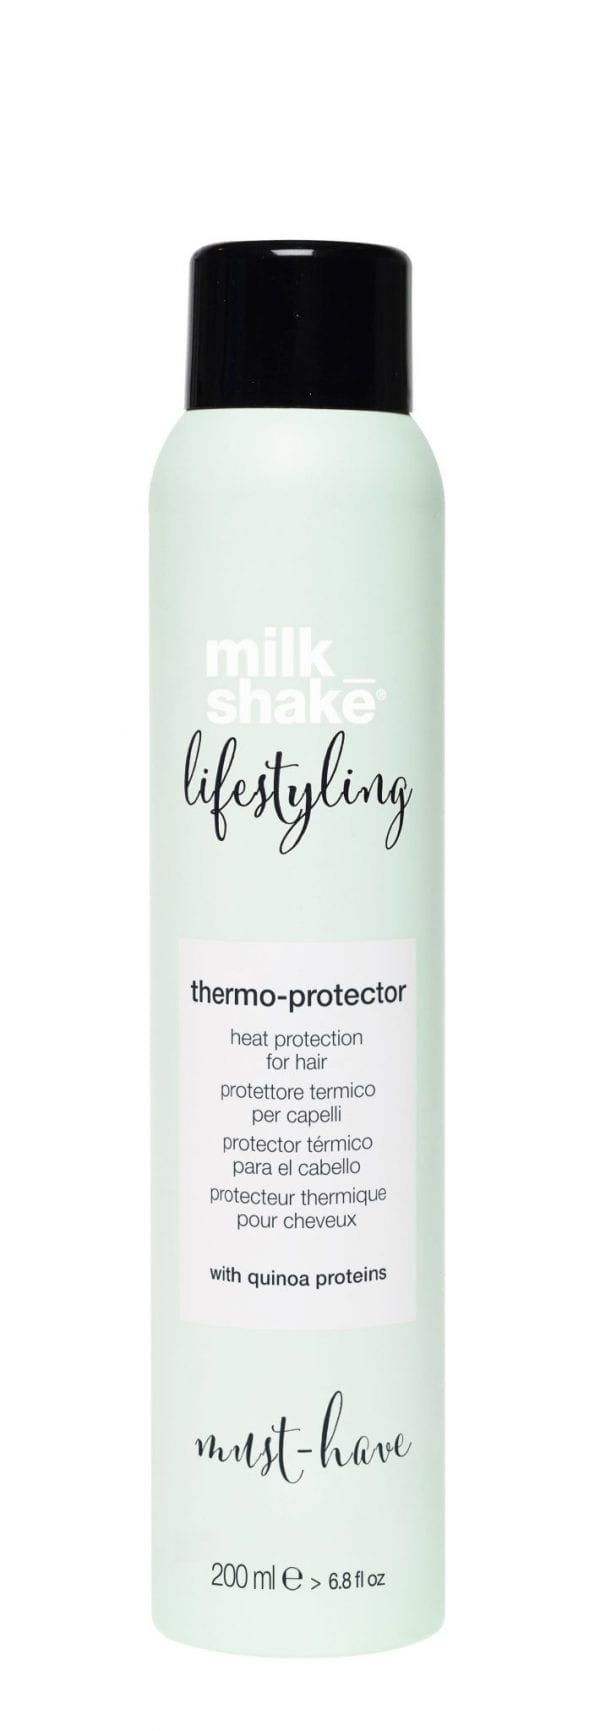 Milk Shake Thermal Protector 200ml - Hair products New Zealand | Nation ...